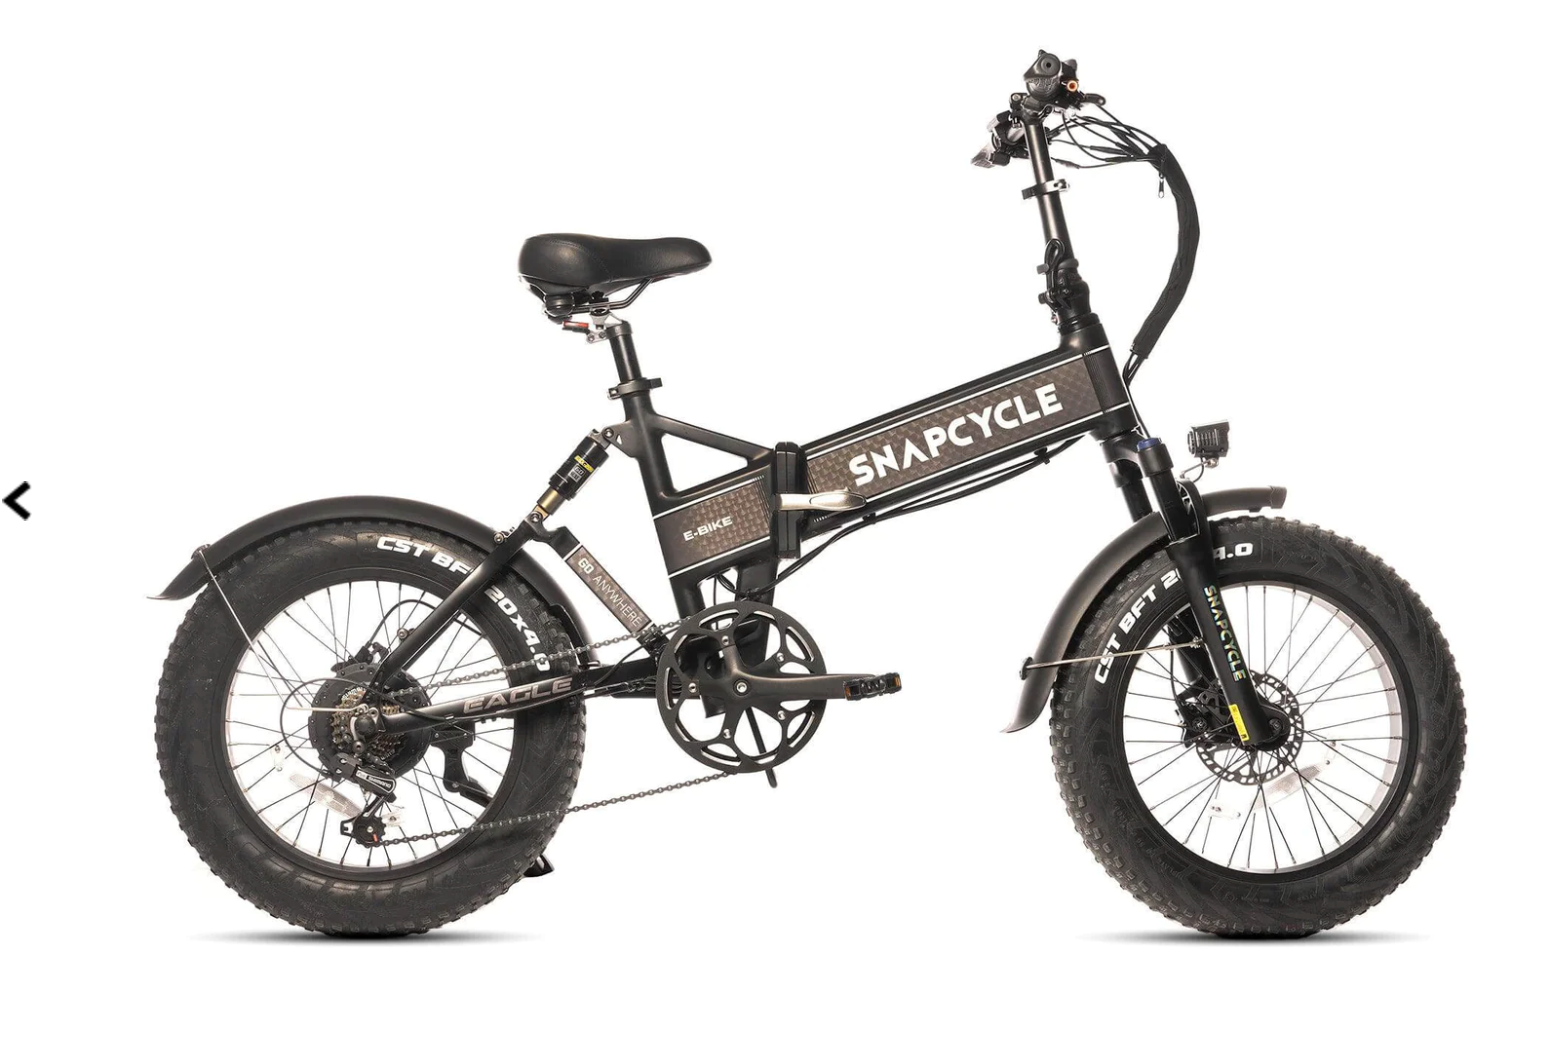 Snapcycle Electric Bikes - Snapcycle Eagle Folding Fat Tire Dual ...